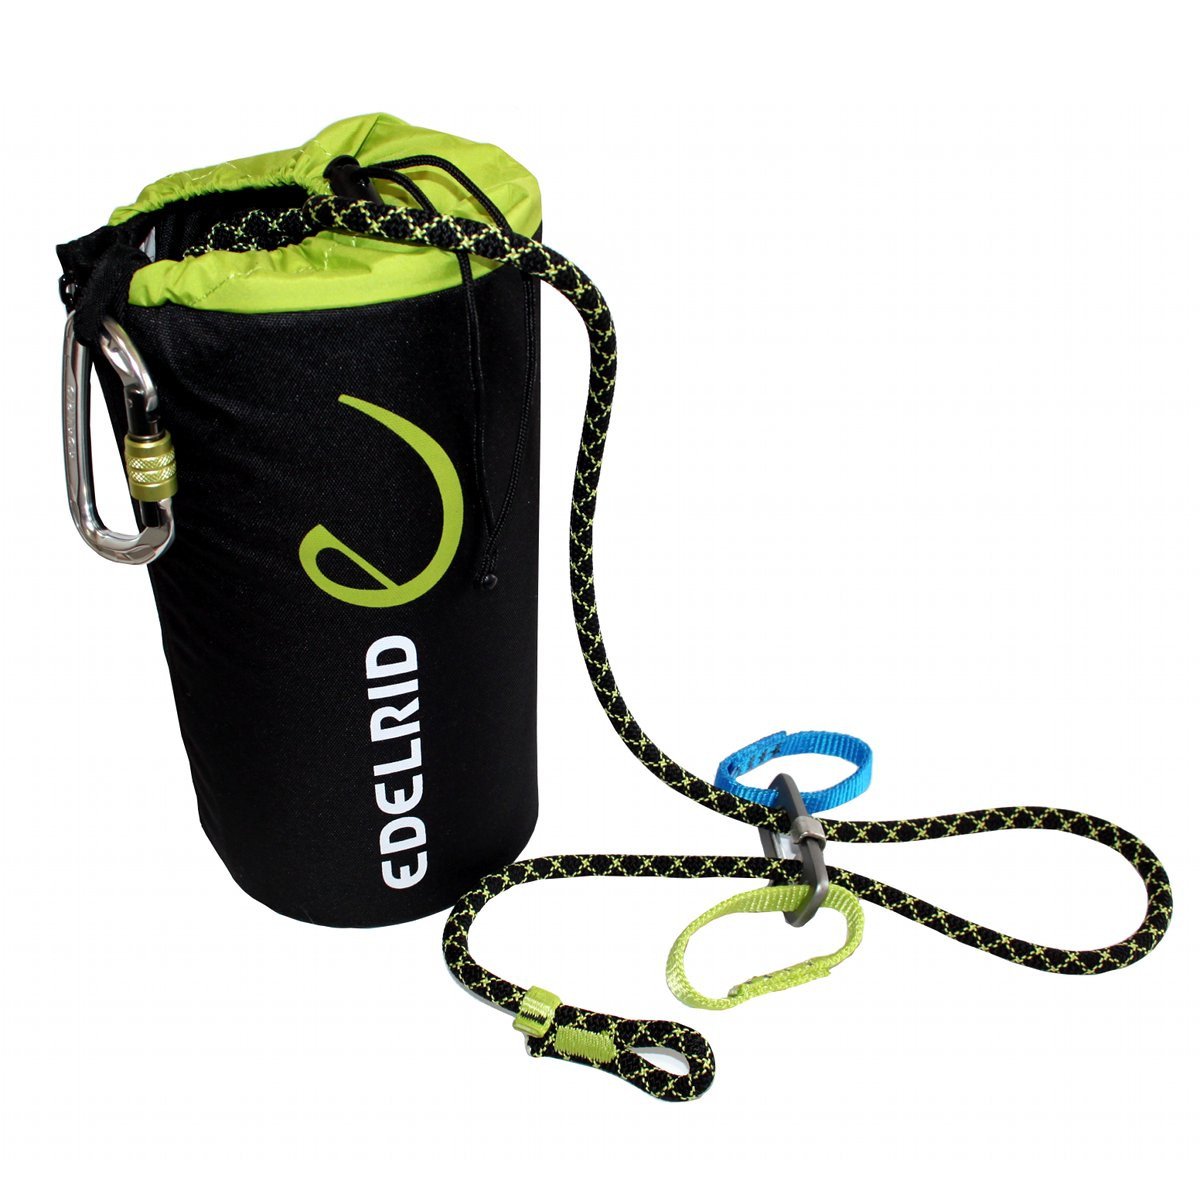 Edelrid Via Ferrata Belay Kit, showing rope bag, lanyard and carabiner in black and green colours